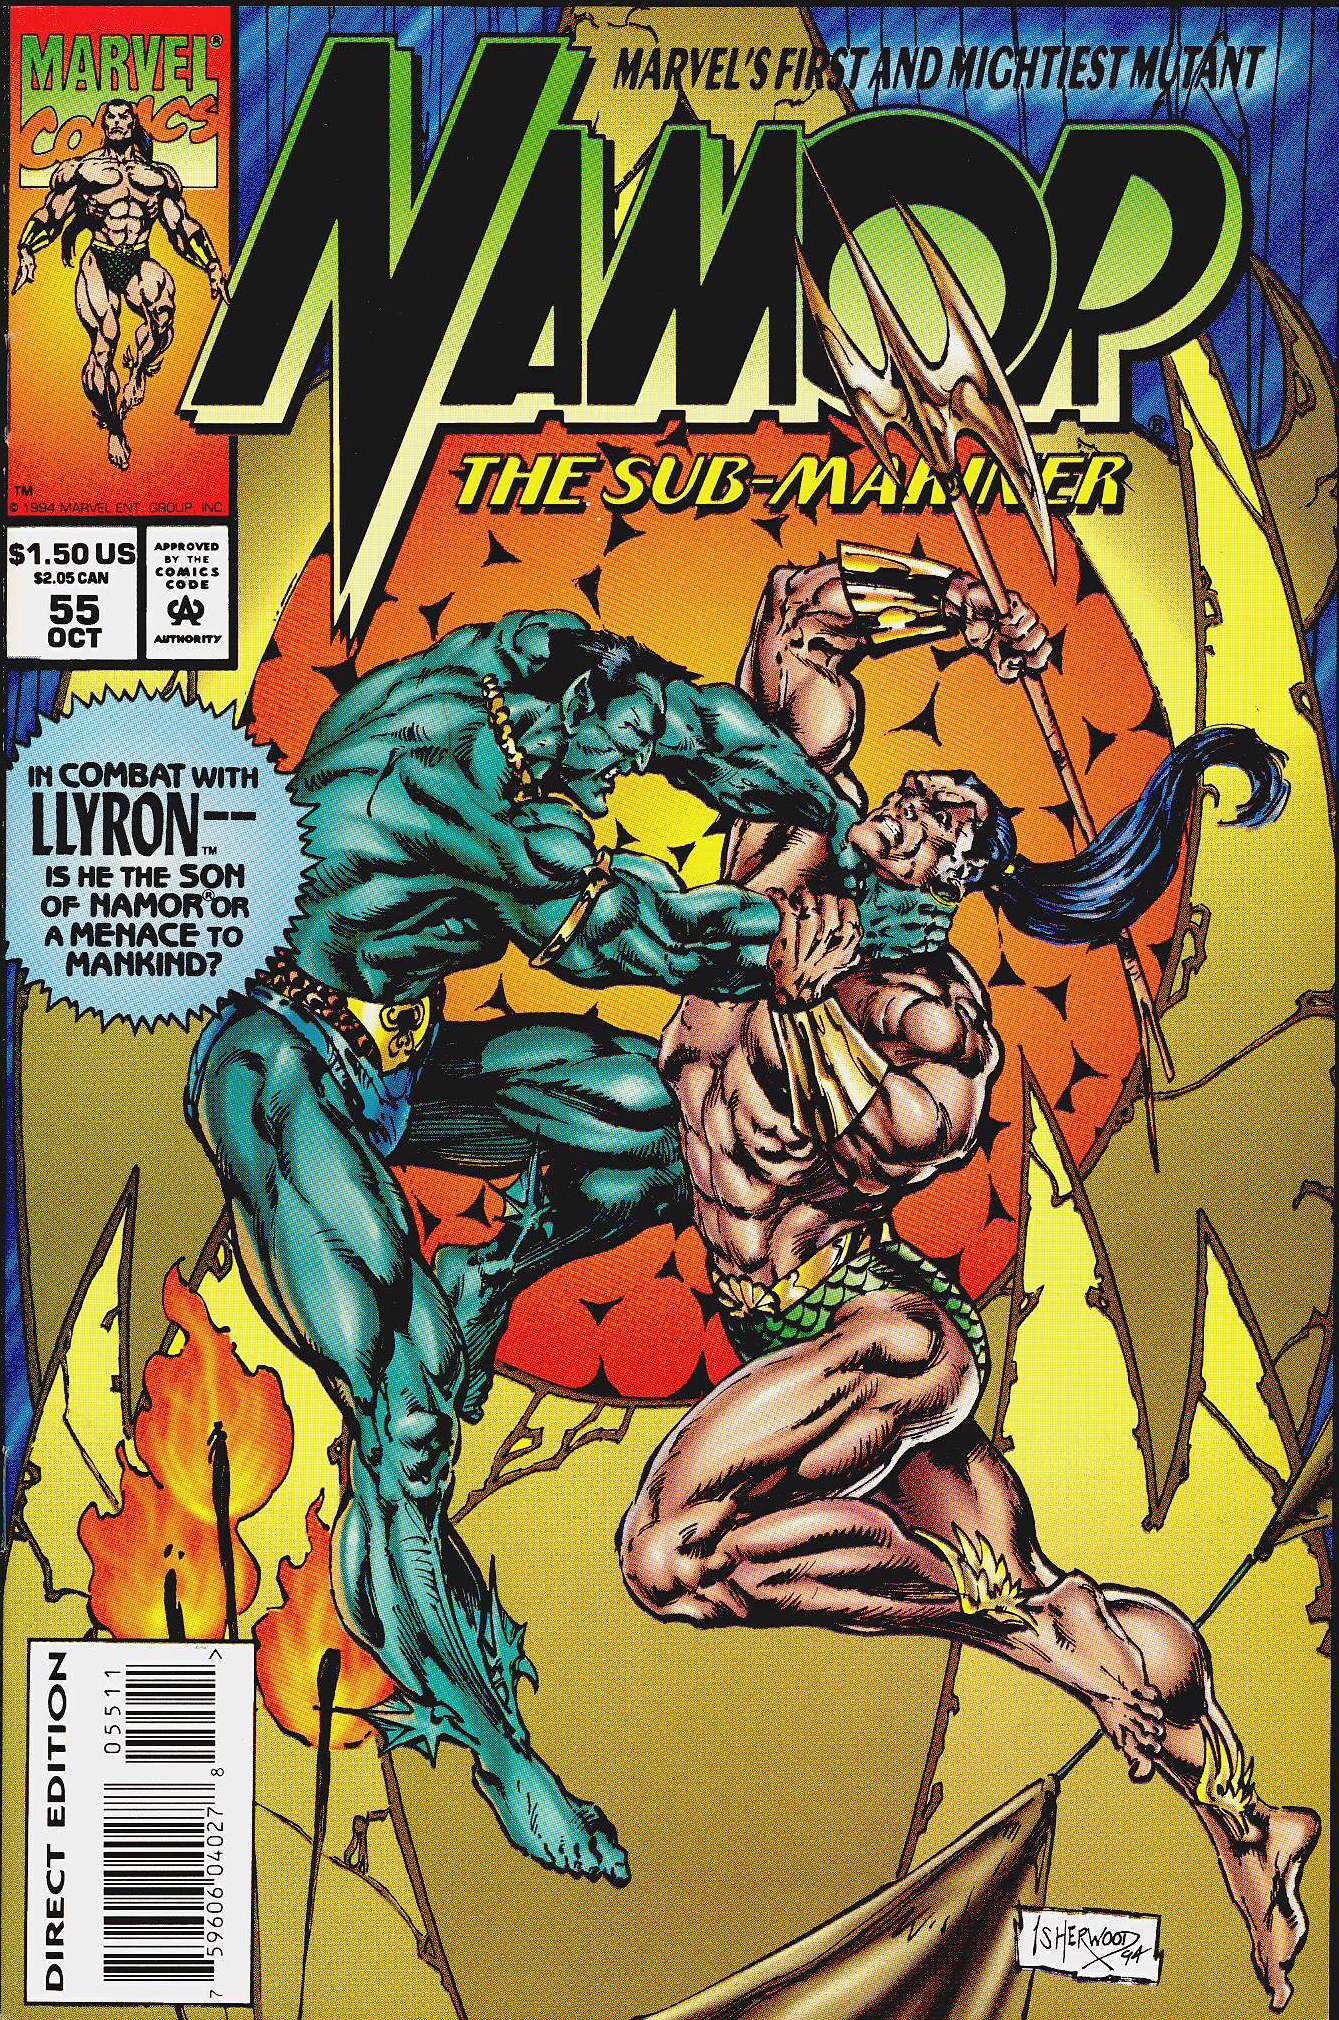 Namor The Sub Mariner Issue 55 | Read Namor The Sub Mariner Issue 55 comic  online in high quality. Read Full Comic online for free - Read comics  online in high quality .| READ COMIC ONLINE